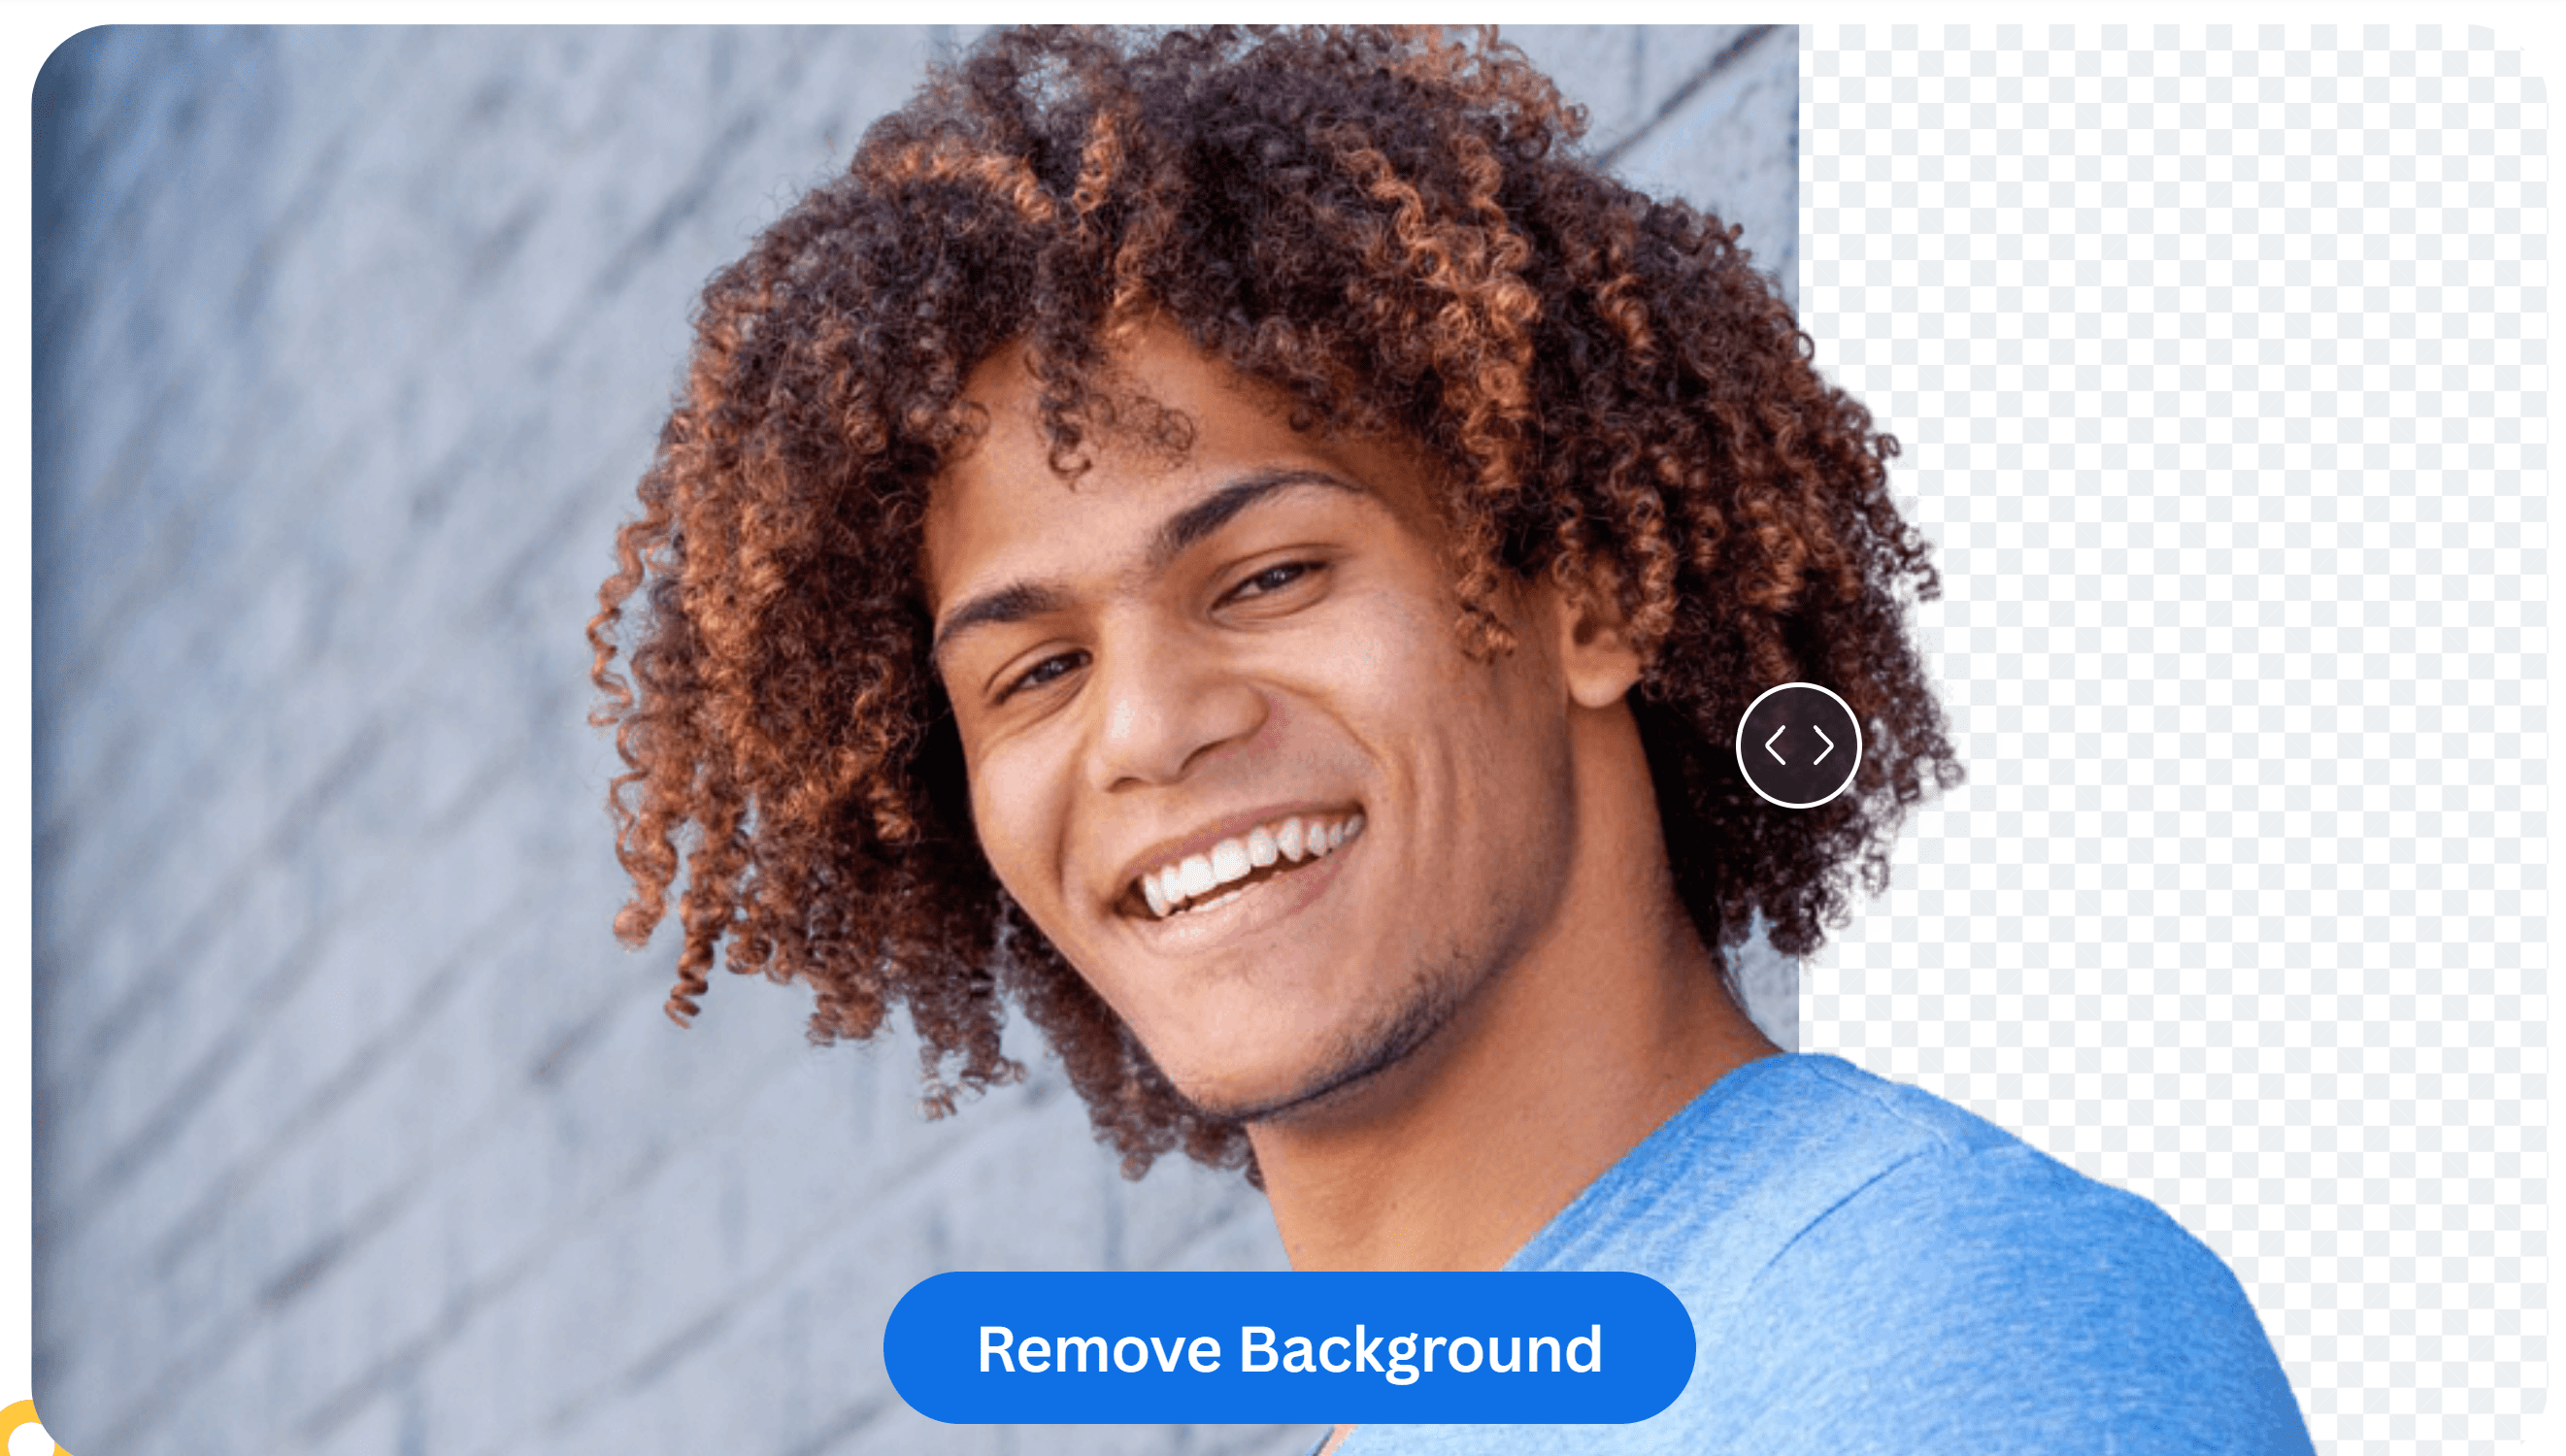 Remove.bg example with man